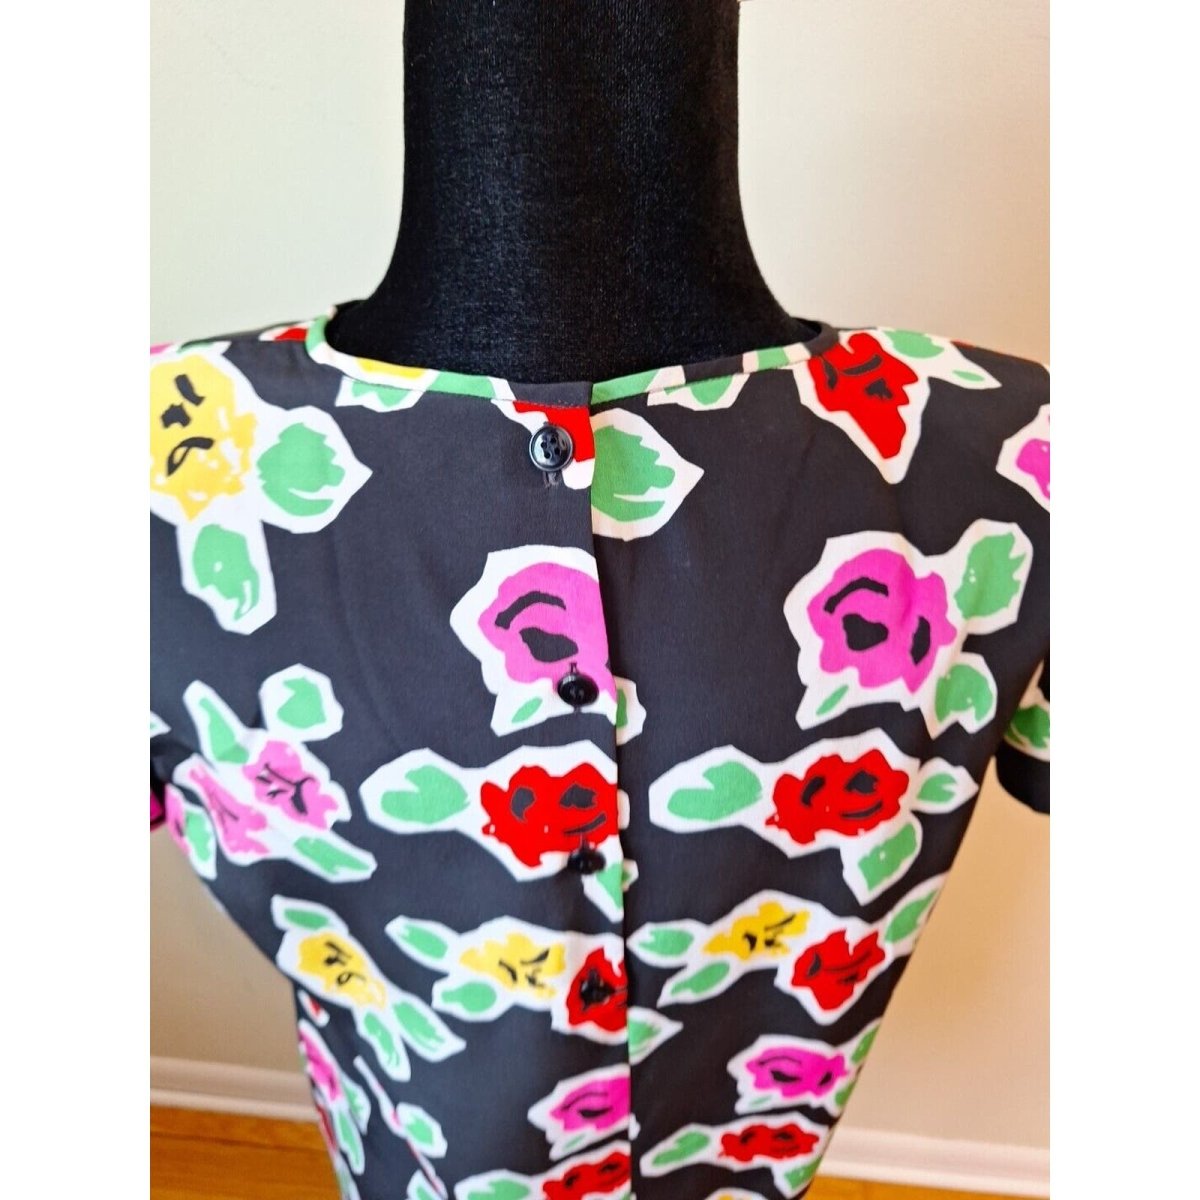 Vintage 80s/90s 100% Silk Rose Print Blouse Women Size S/M - themallvintage The Mall Vintage